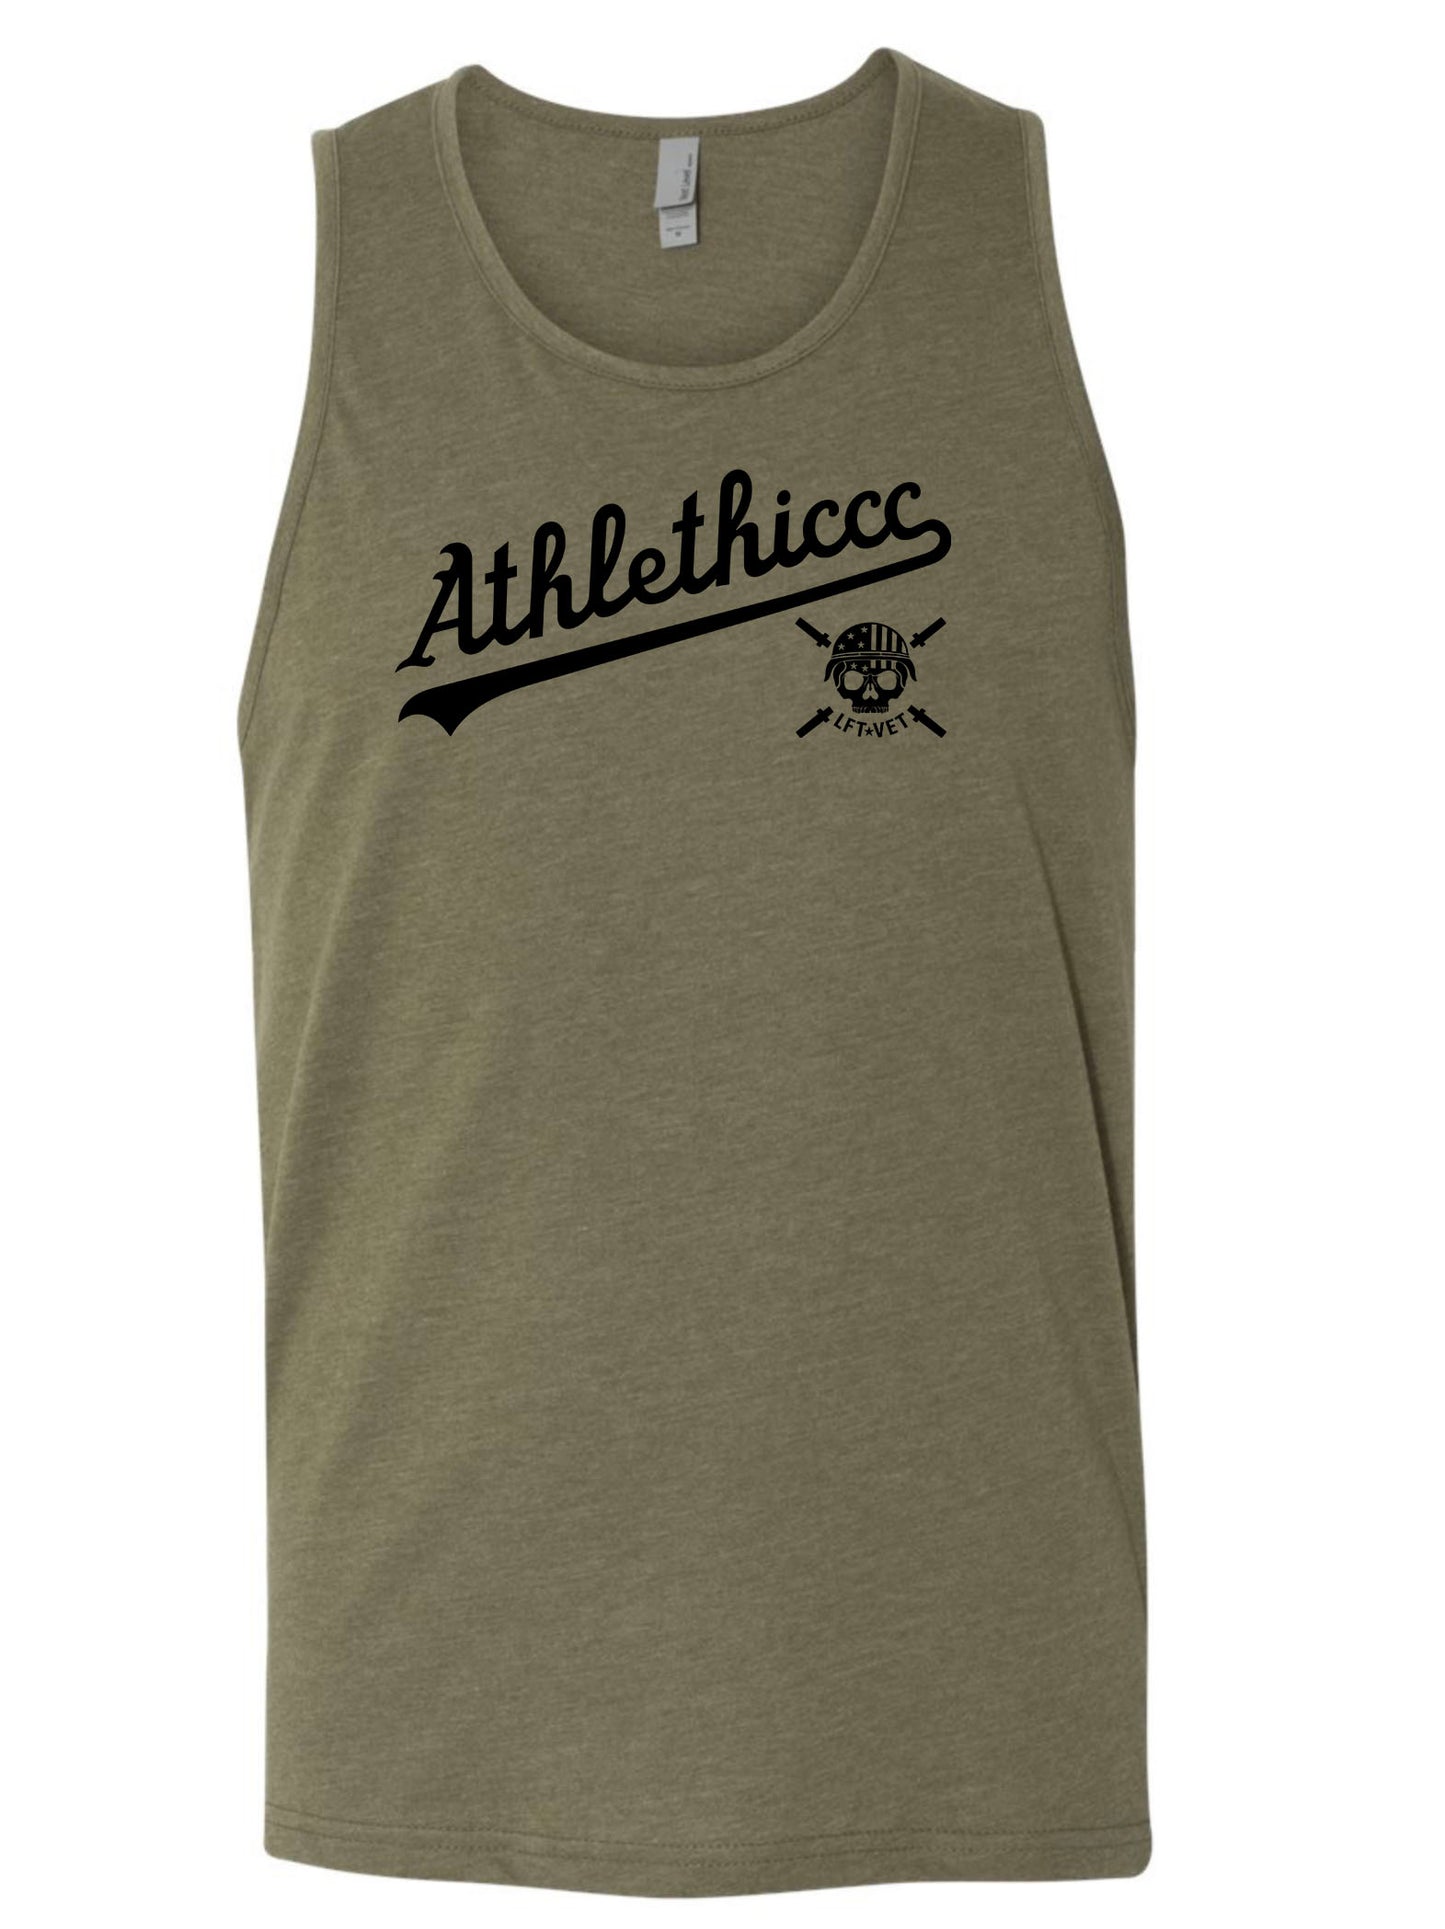 Athlethiccc